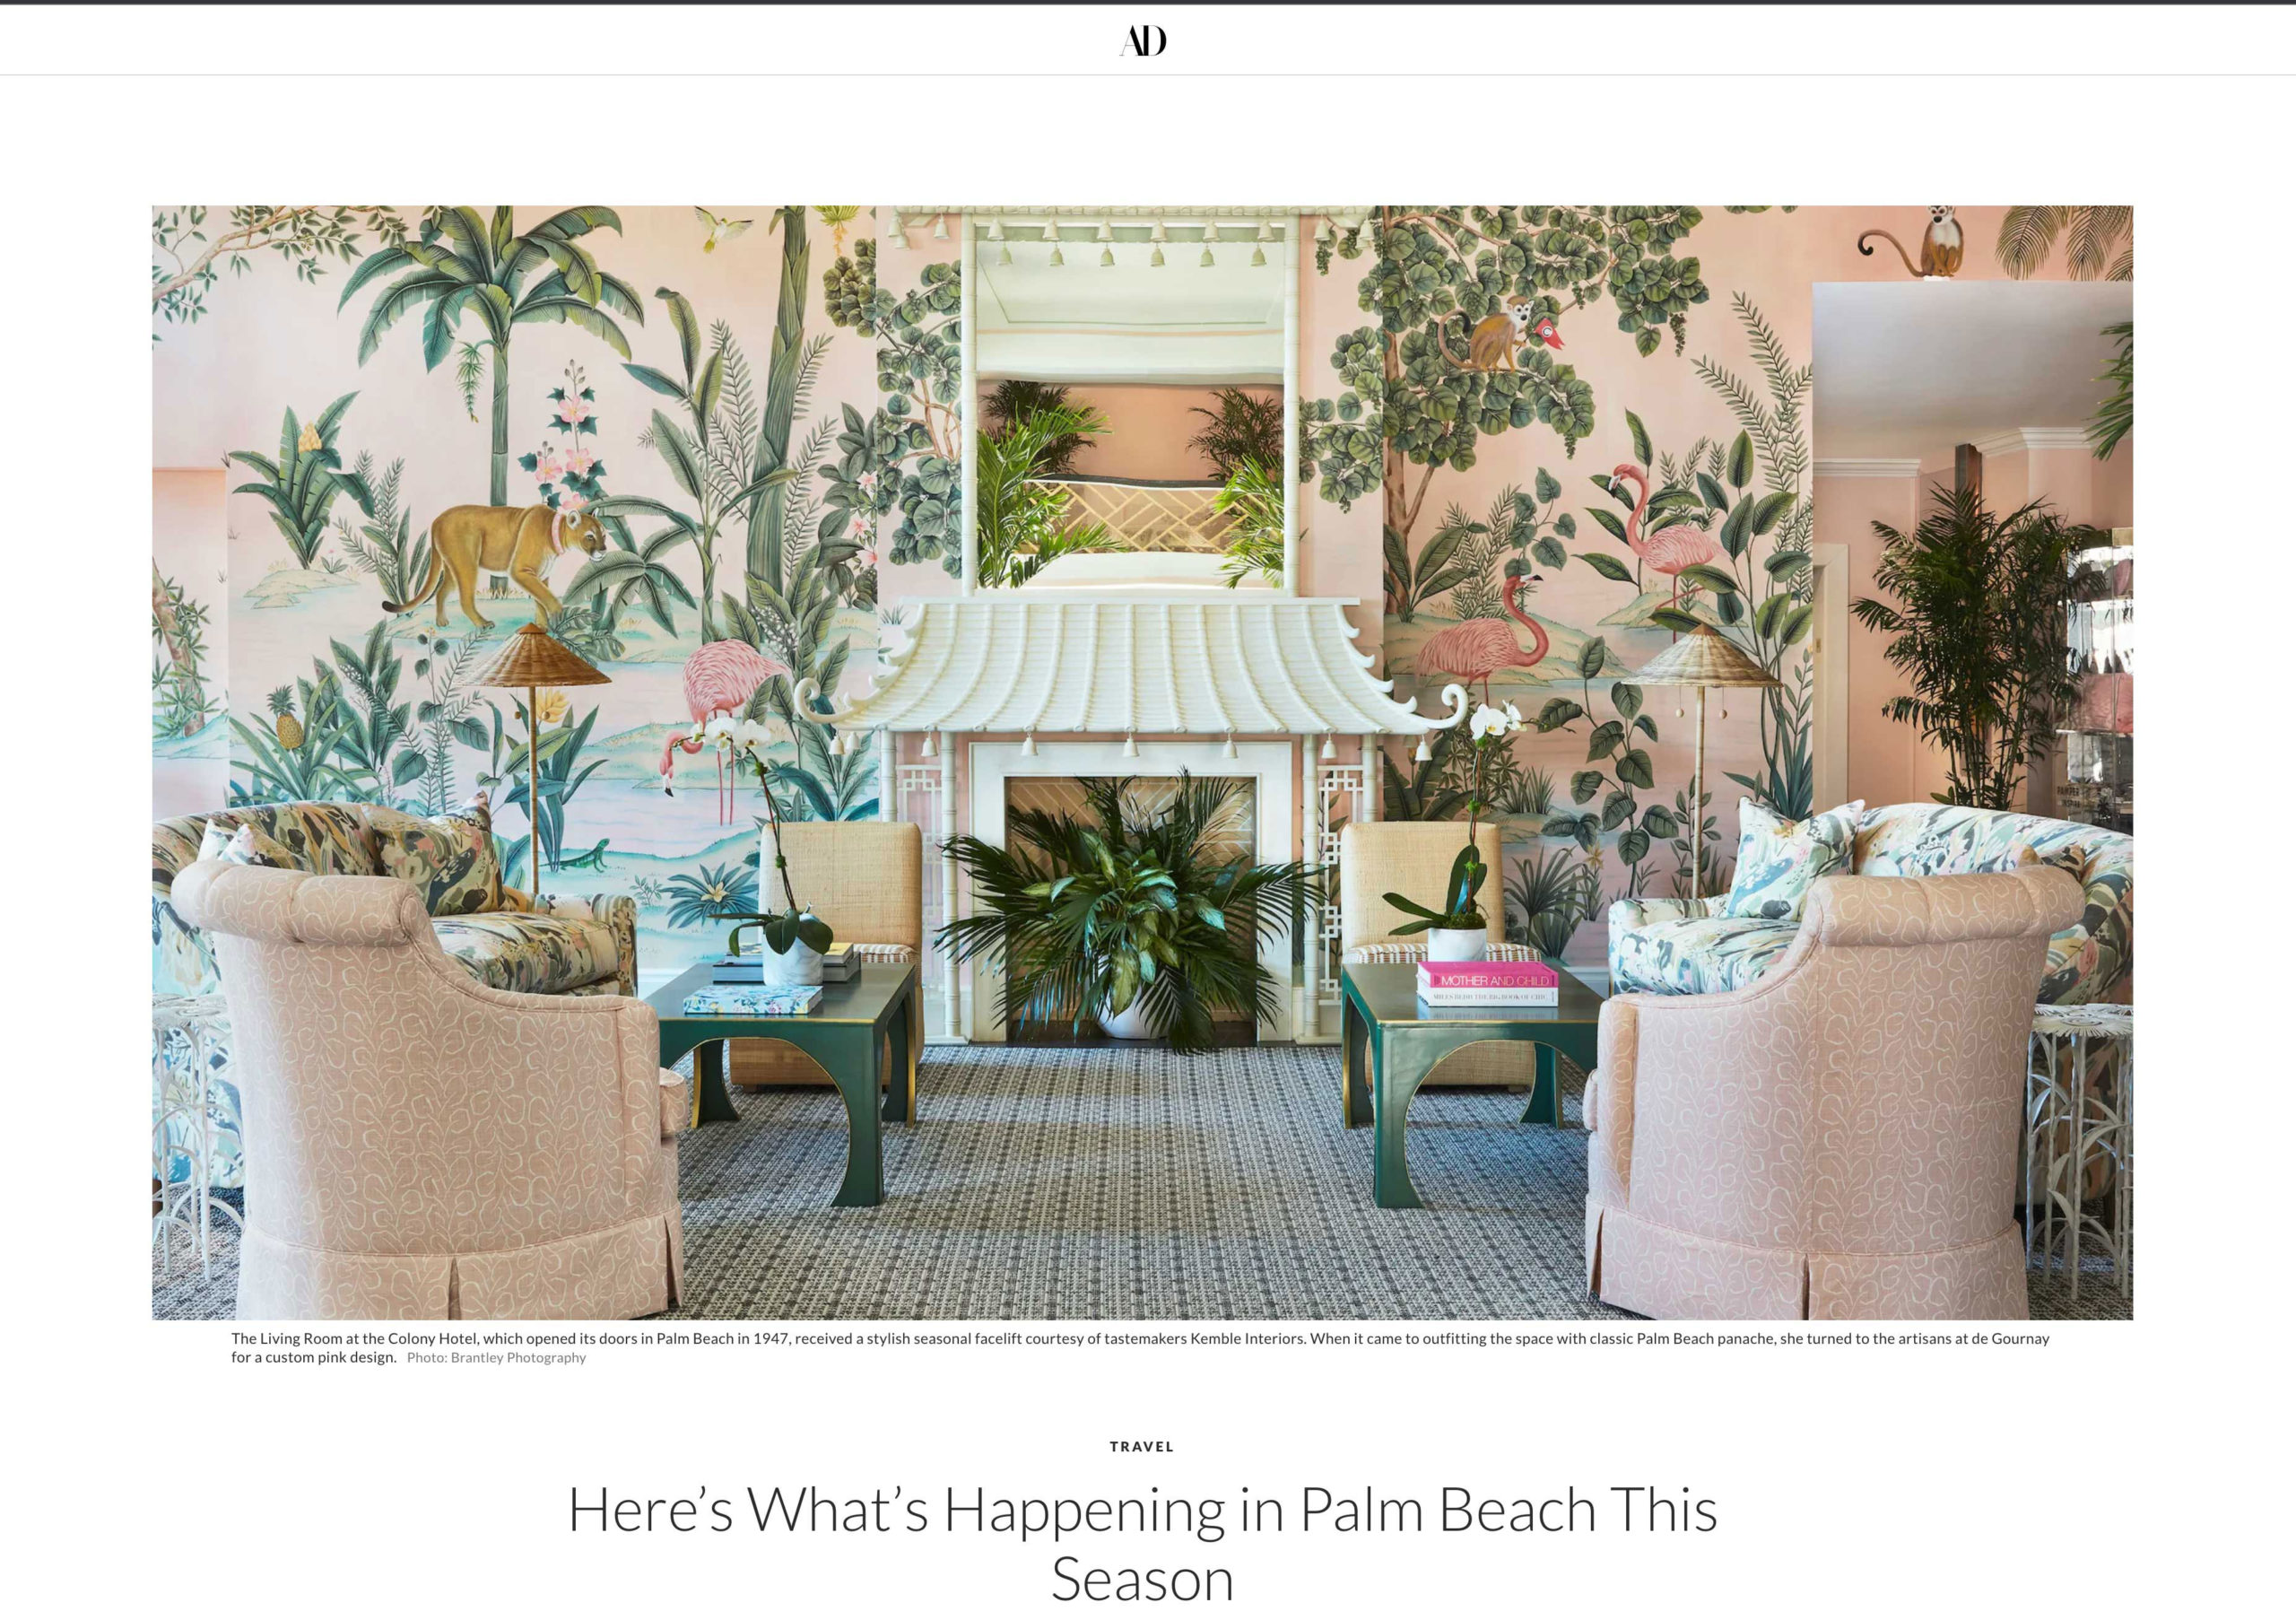 Architectural Digest: What’s New in Palm Beach 2022